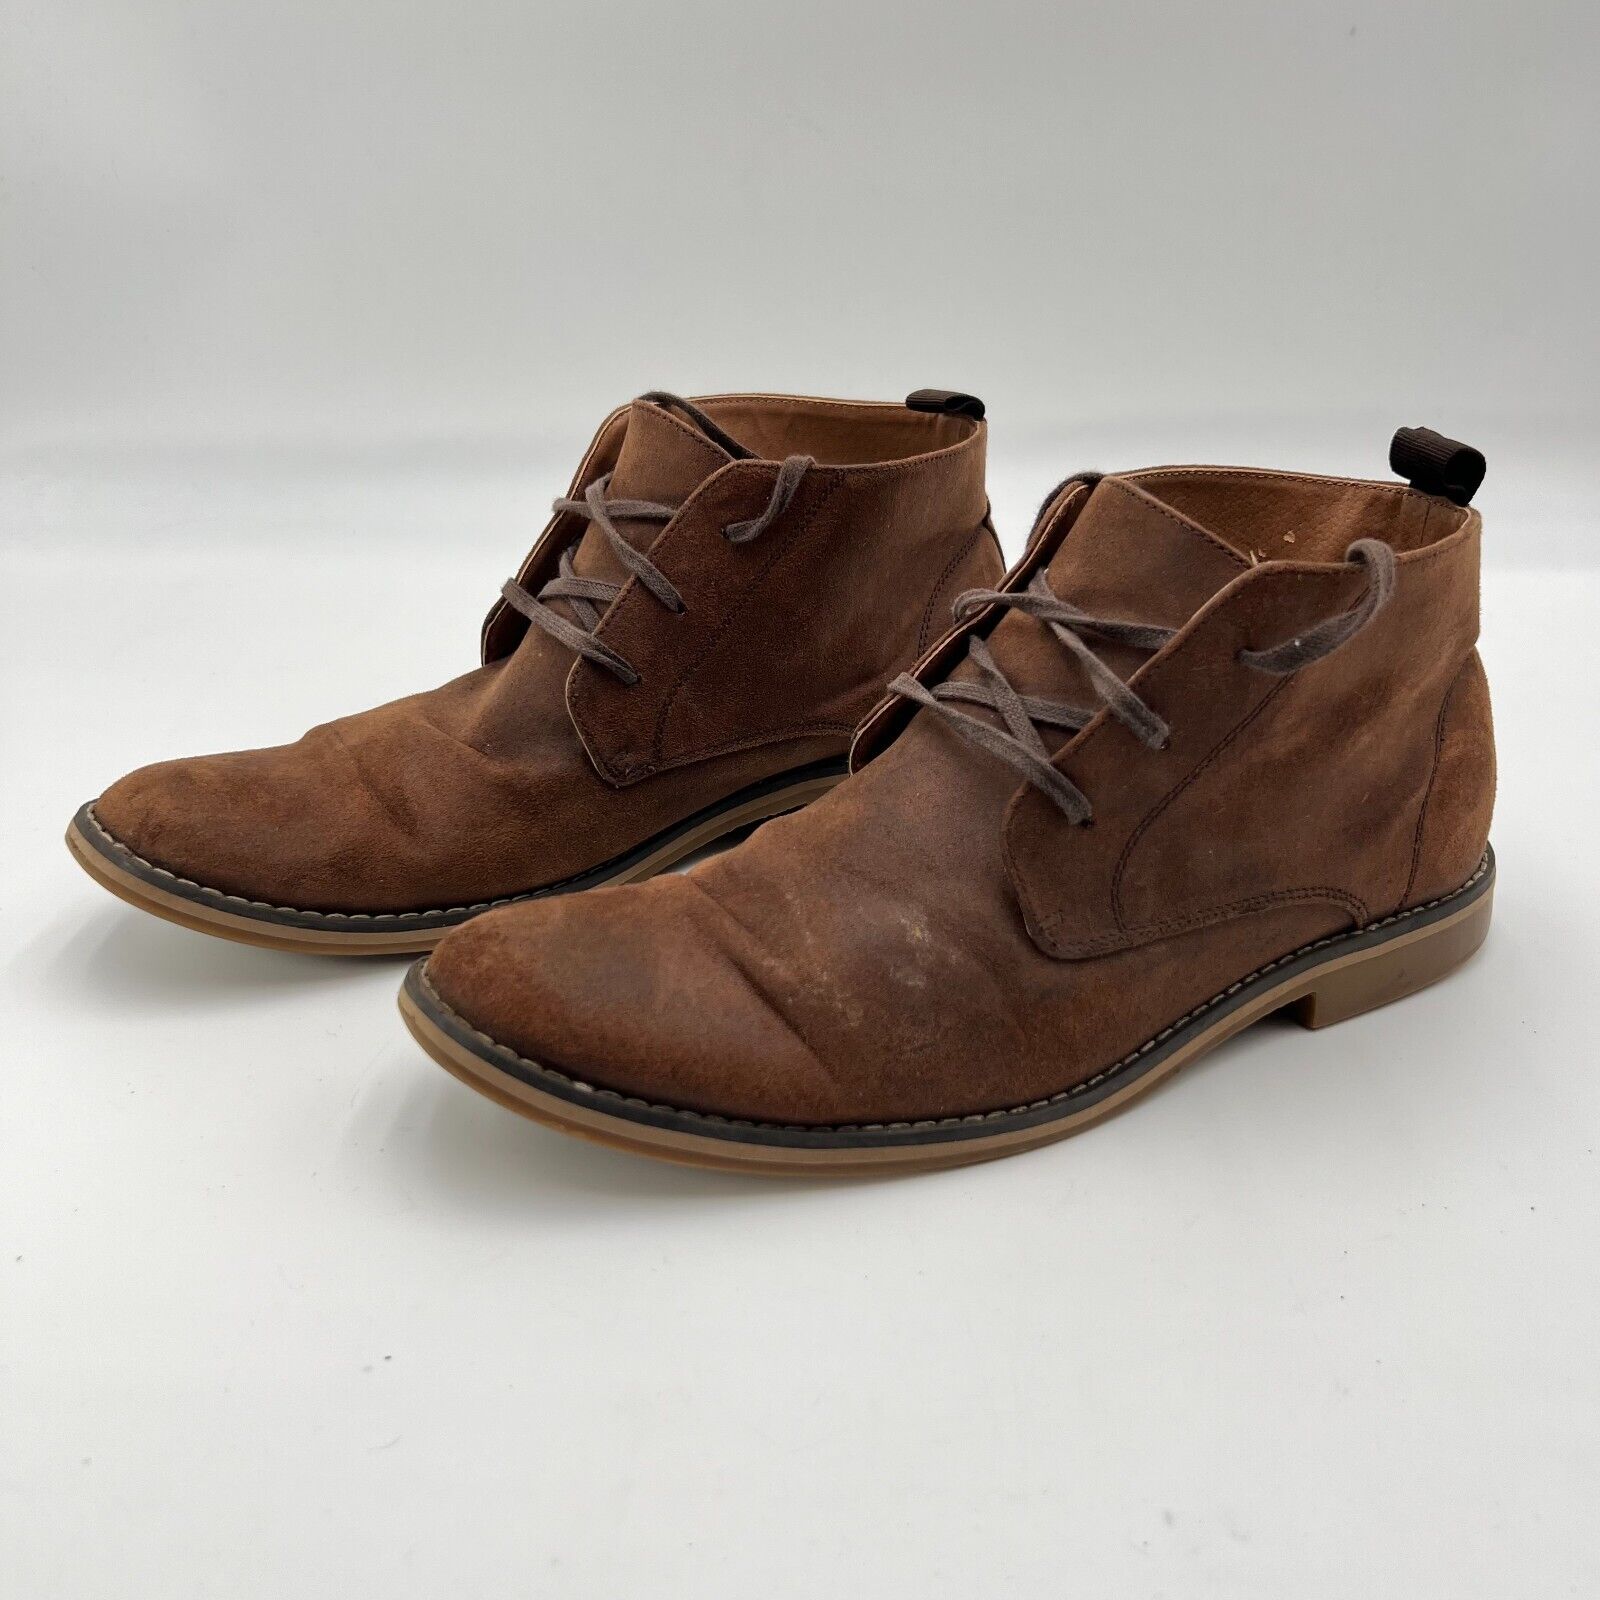 H&M Chukka Boots 232760 Brown Suede Leather Lace Up Casual Men’s US Size 10